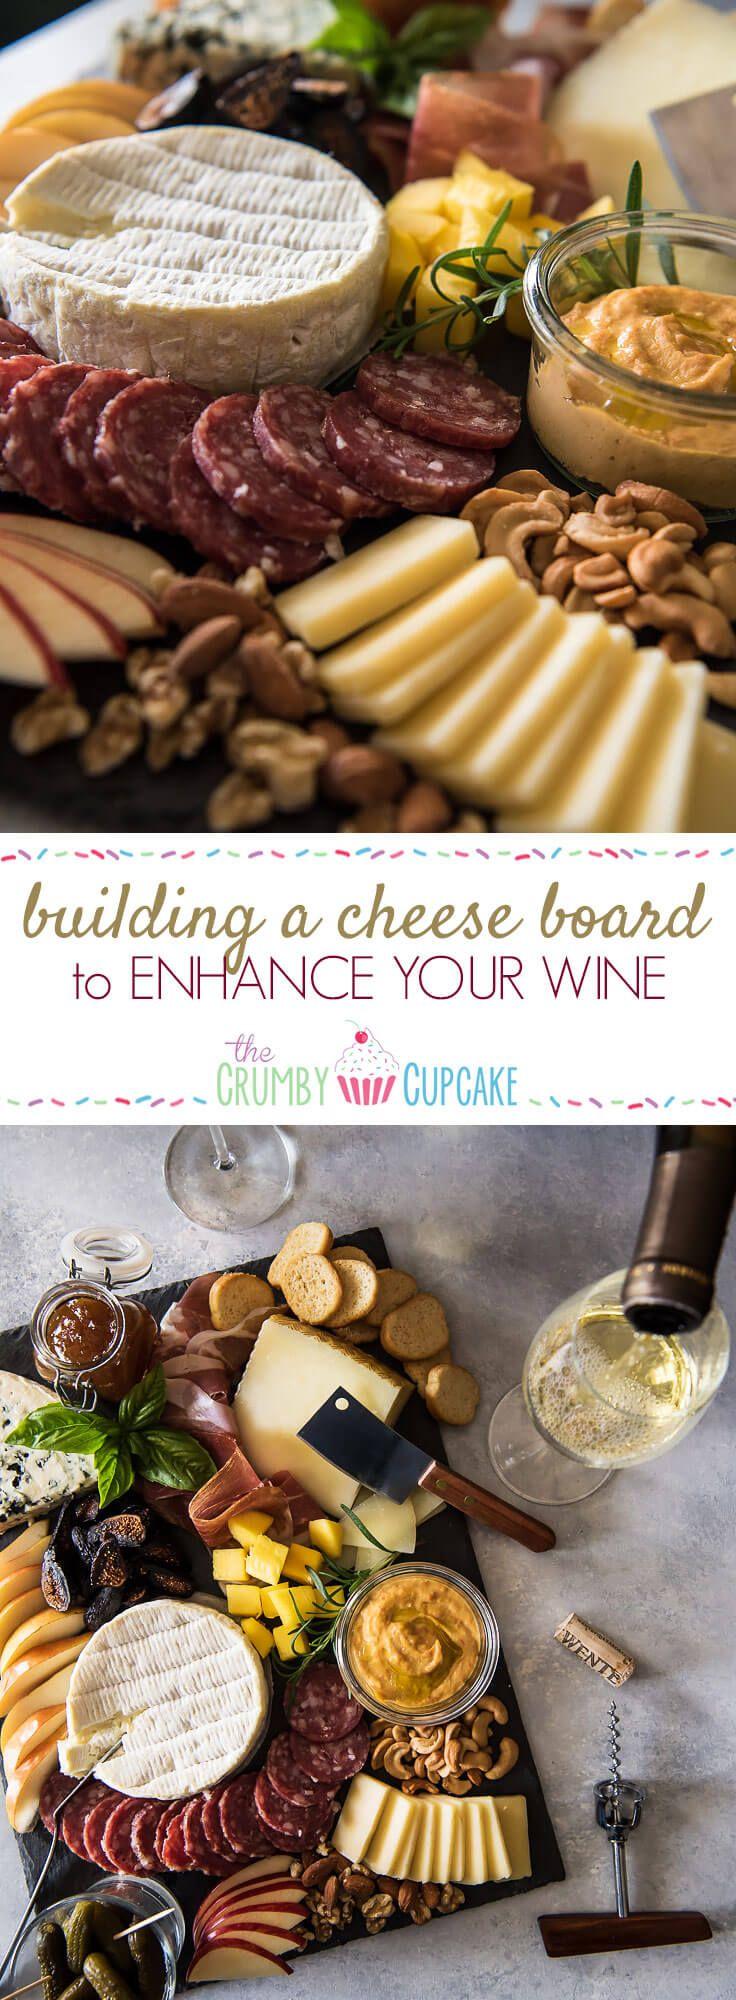 Hochzeit - How To Build A Cheese Board To Enhance Your Wine